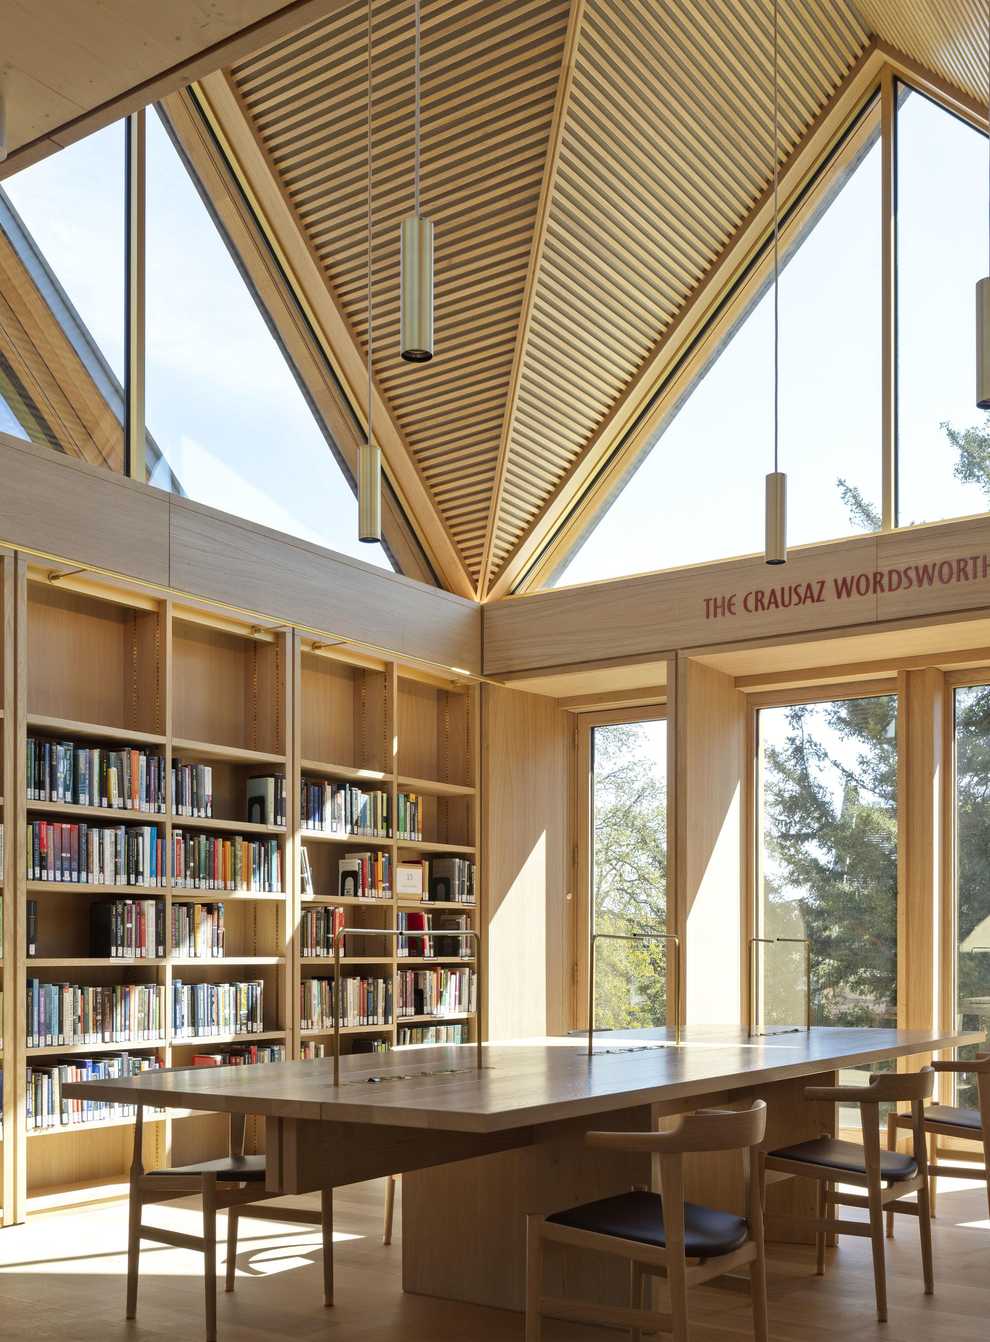 The New Library’s vaulted windows allow natural light to flood in (Riba/PA)